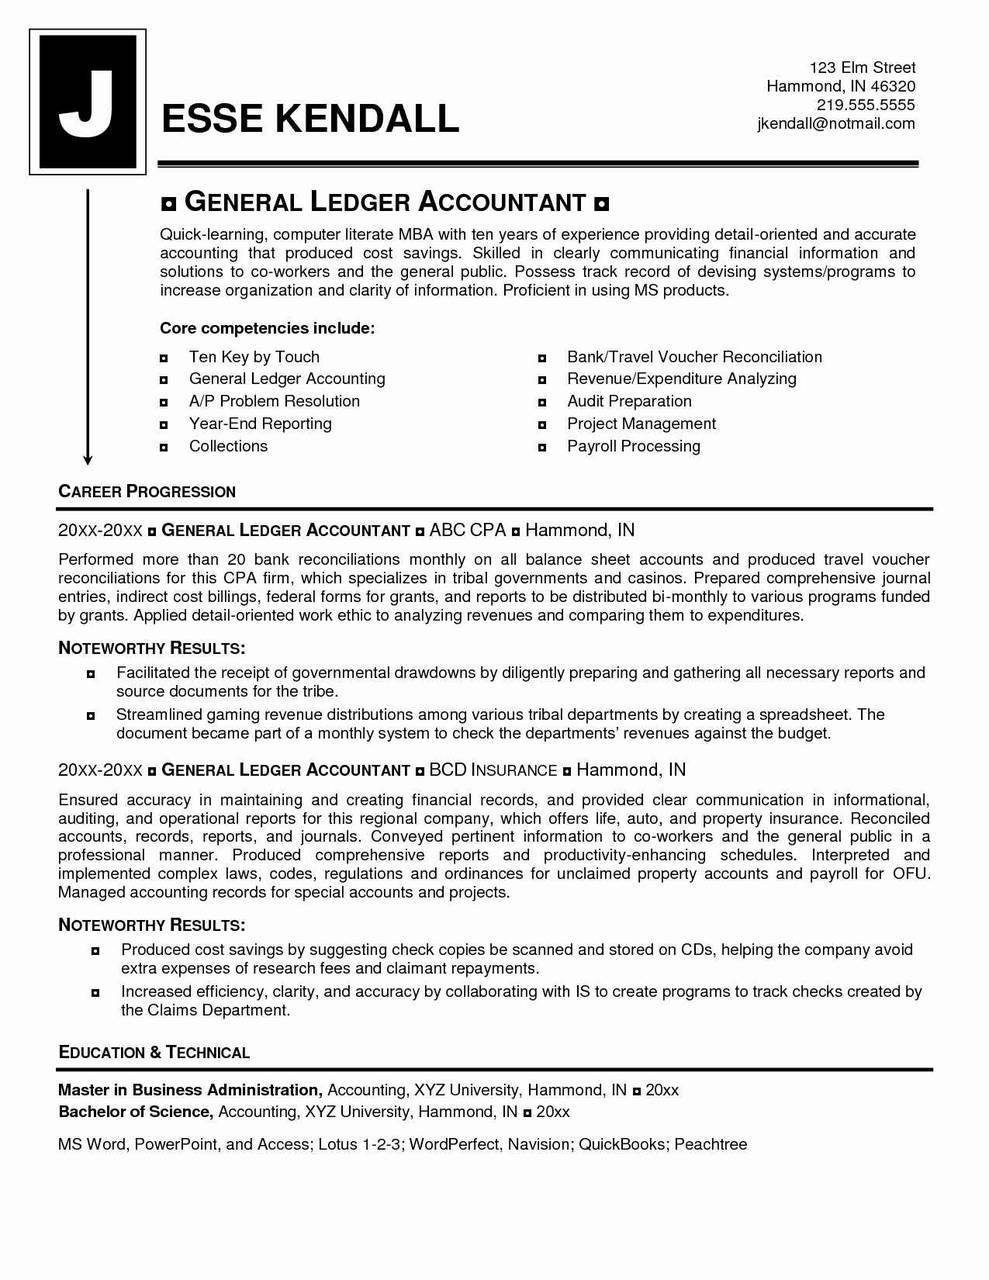 sample resume pdf file download awesome accountant resume format pdf